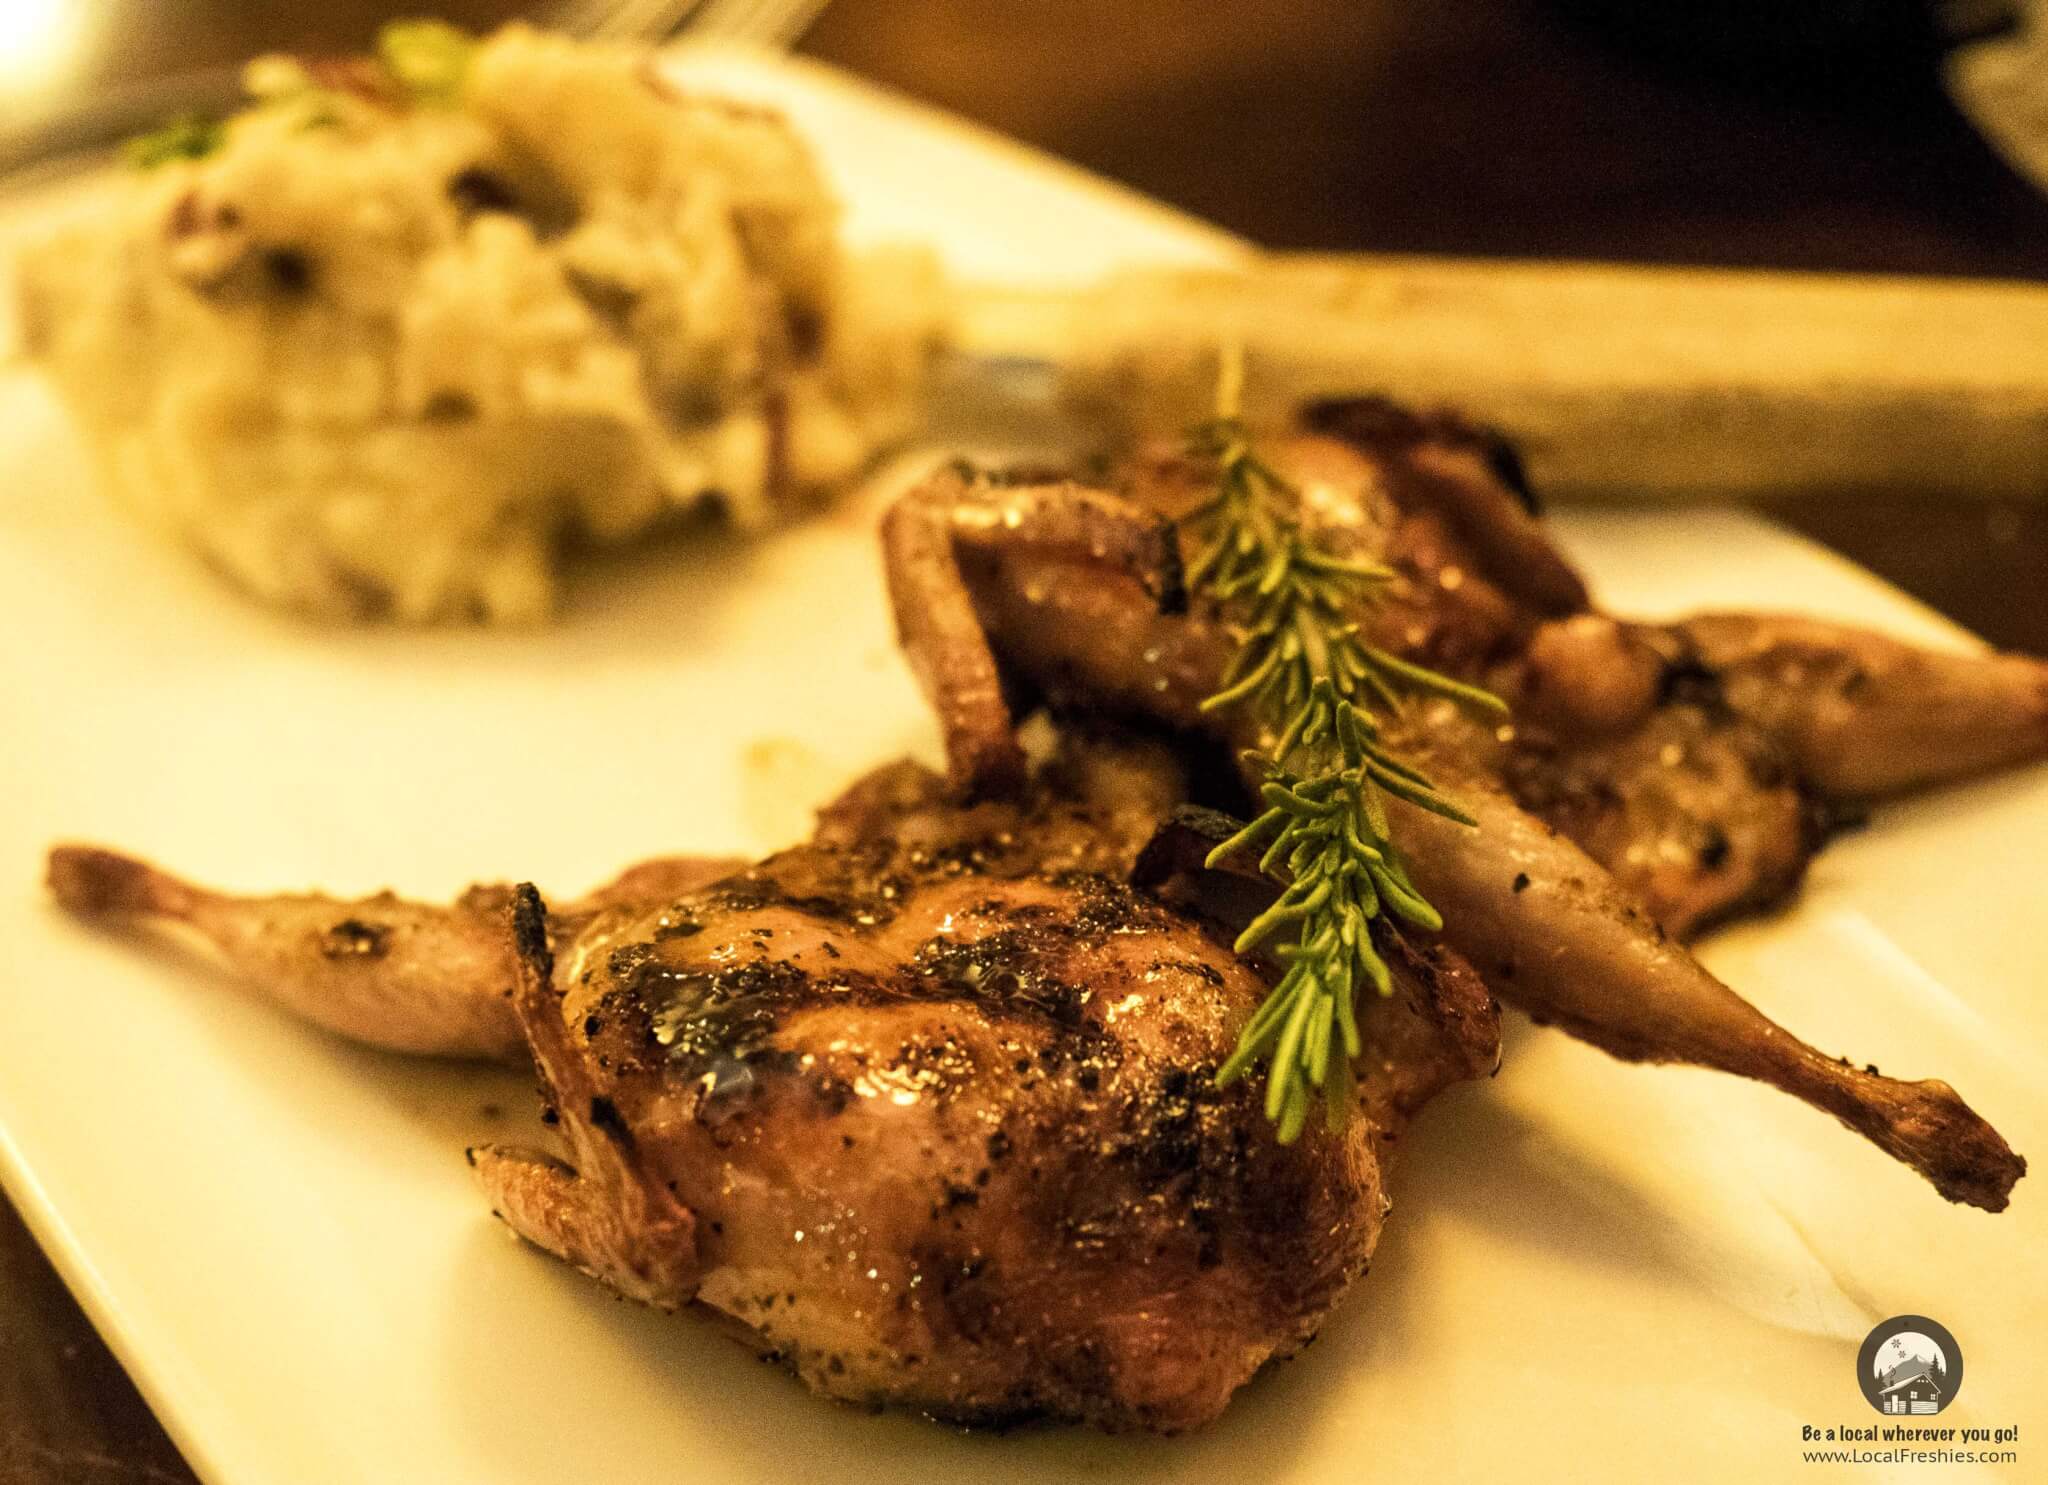  Fire-Grilled Oregon Quail dinner at Elevation 486 Cafe in Twin Falls Idaho